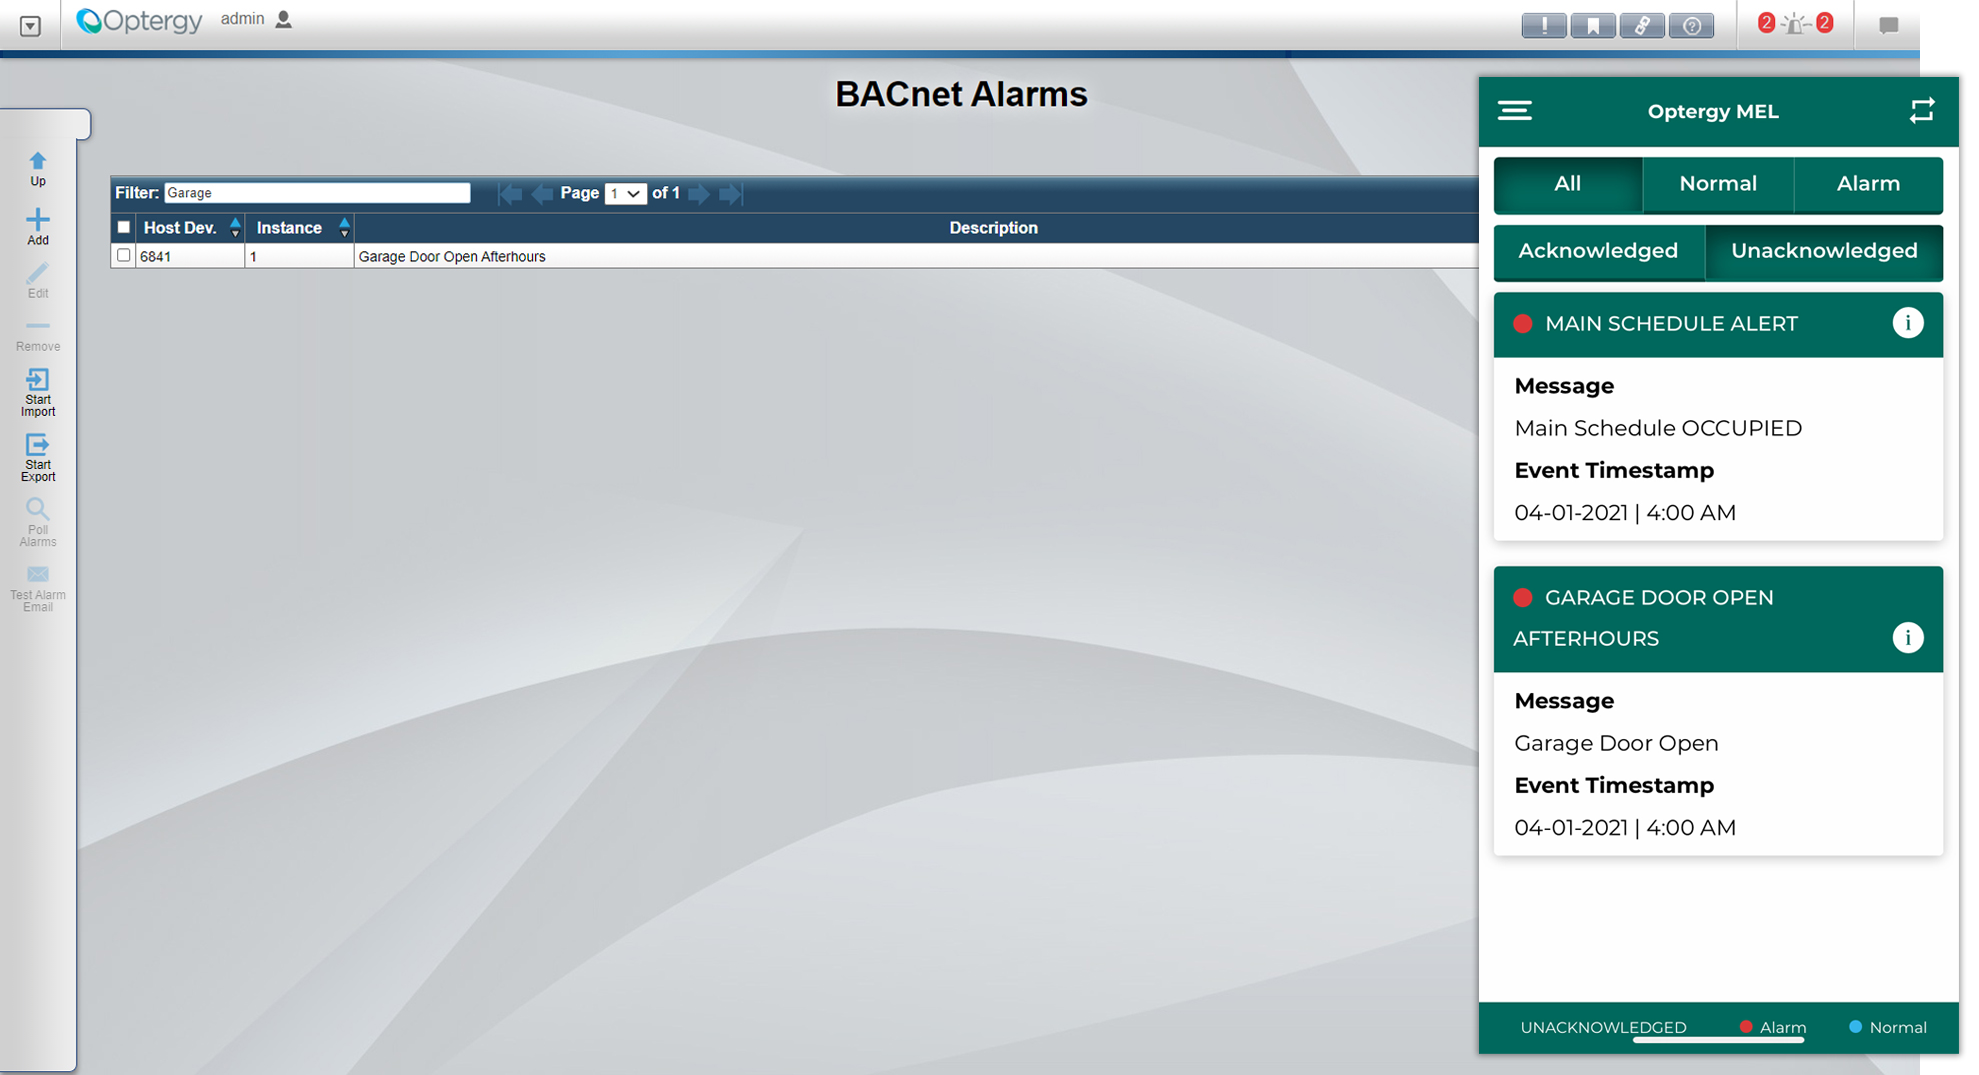 BACnet Alarms and Acknowledgement